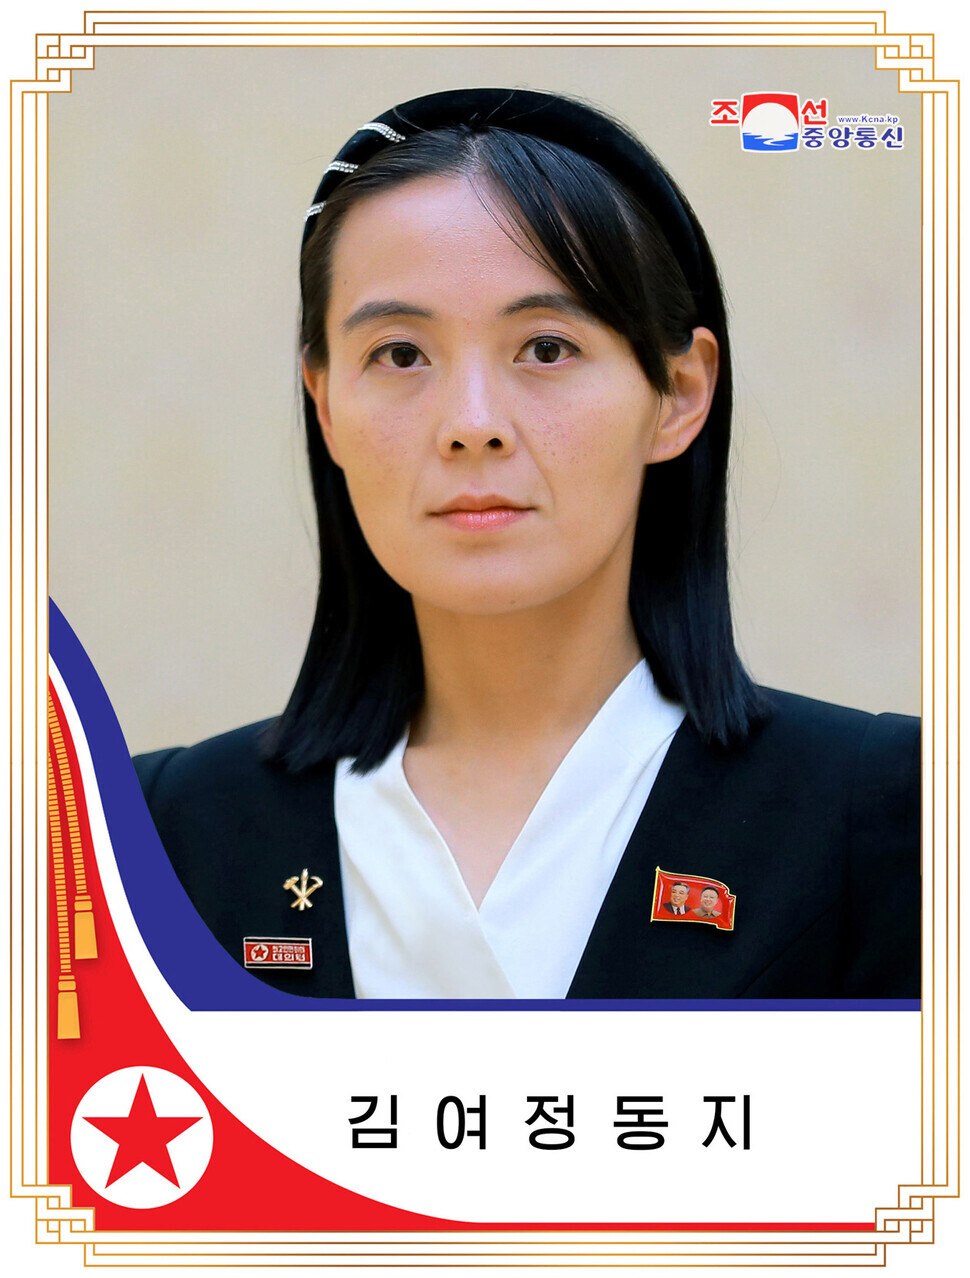 North Korea’s state-run newspaper the Rodong Sinmun reported on Thursday that Kim Yo-jong, younger sister of North Korean leader Kim Jong-un, had been elected to the State Affairs Commission (SAC) during the second day of the fifth session of the 14th Supreme People's Assembly, which was held at the Mansudae Assembly Hall, in Pyongyang, on Sept. 29. (KCNA/Yonhap News)